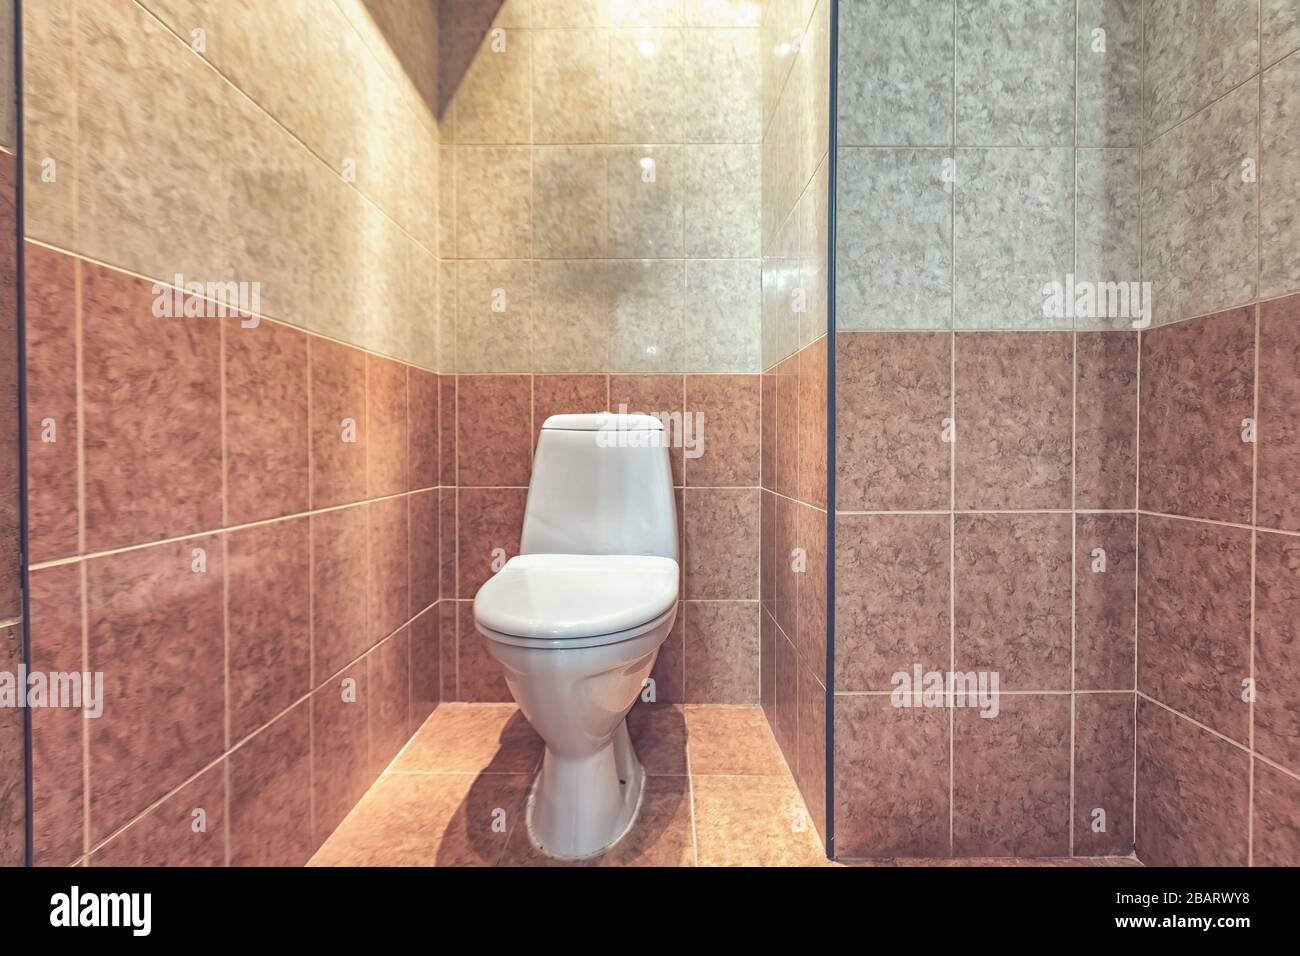 Toilet bowl in the toilet room. Restroom with beige tile decoration and  flooring Stock Photo - Alamy